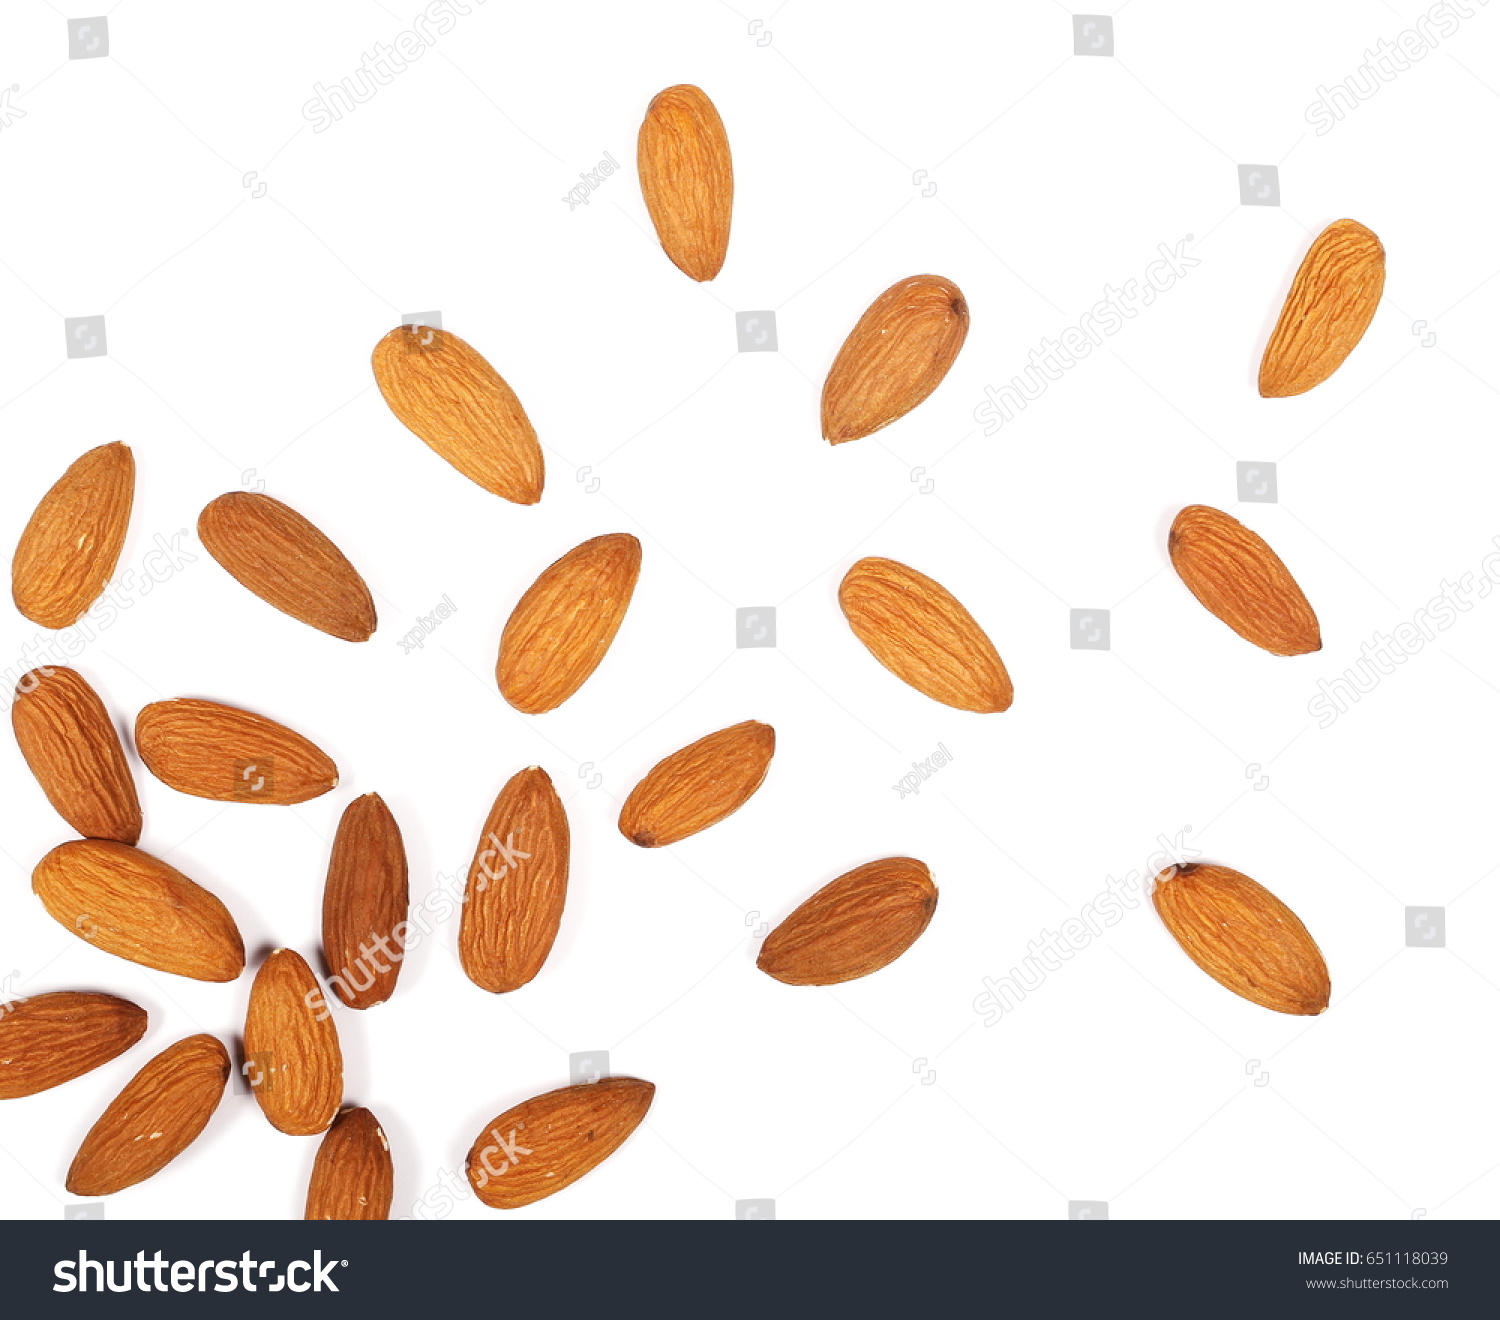 Almond nuts isolated on white background, top view #651118039